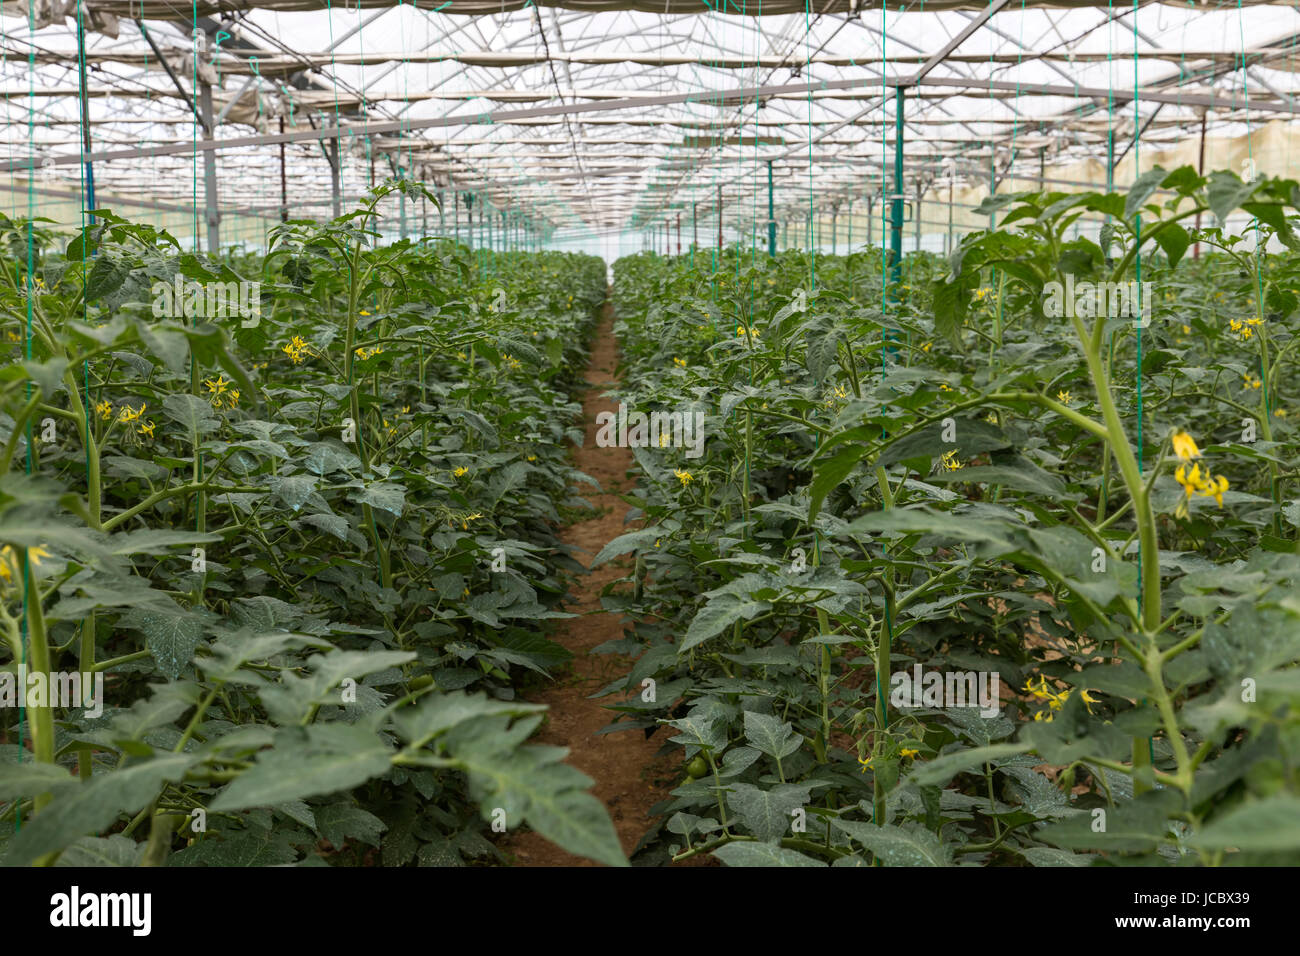 Rows of tomato plants growing inside in a big industrial greenhouse Stock Photo